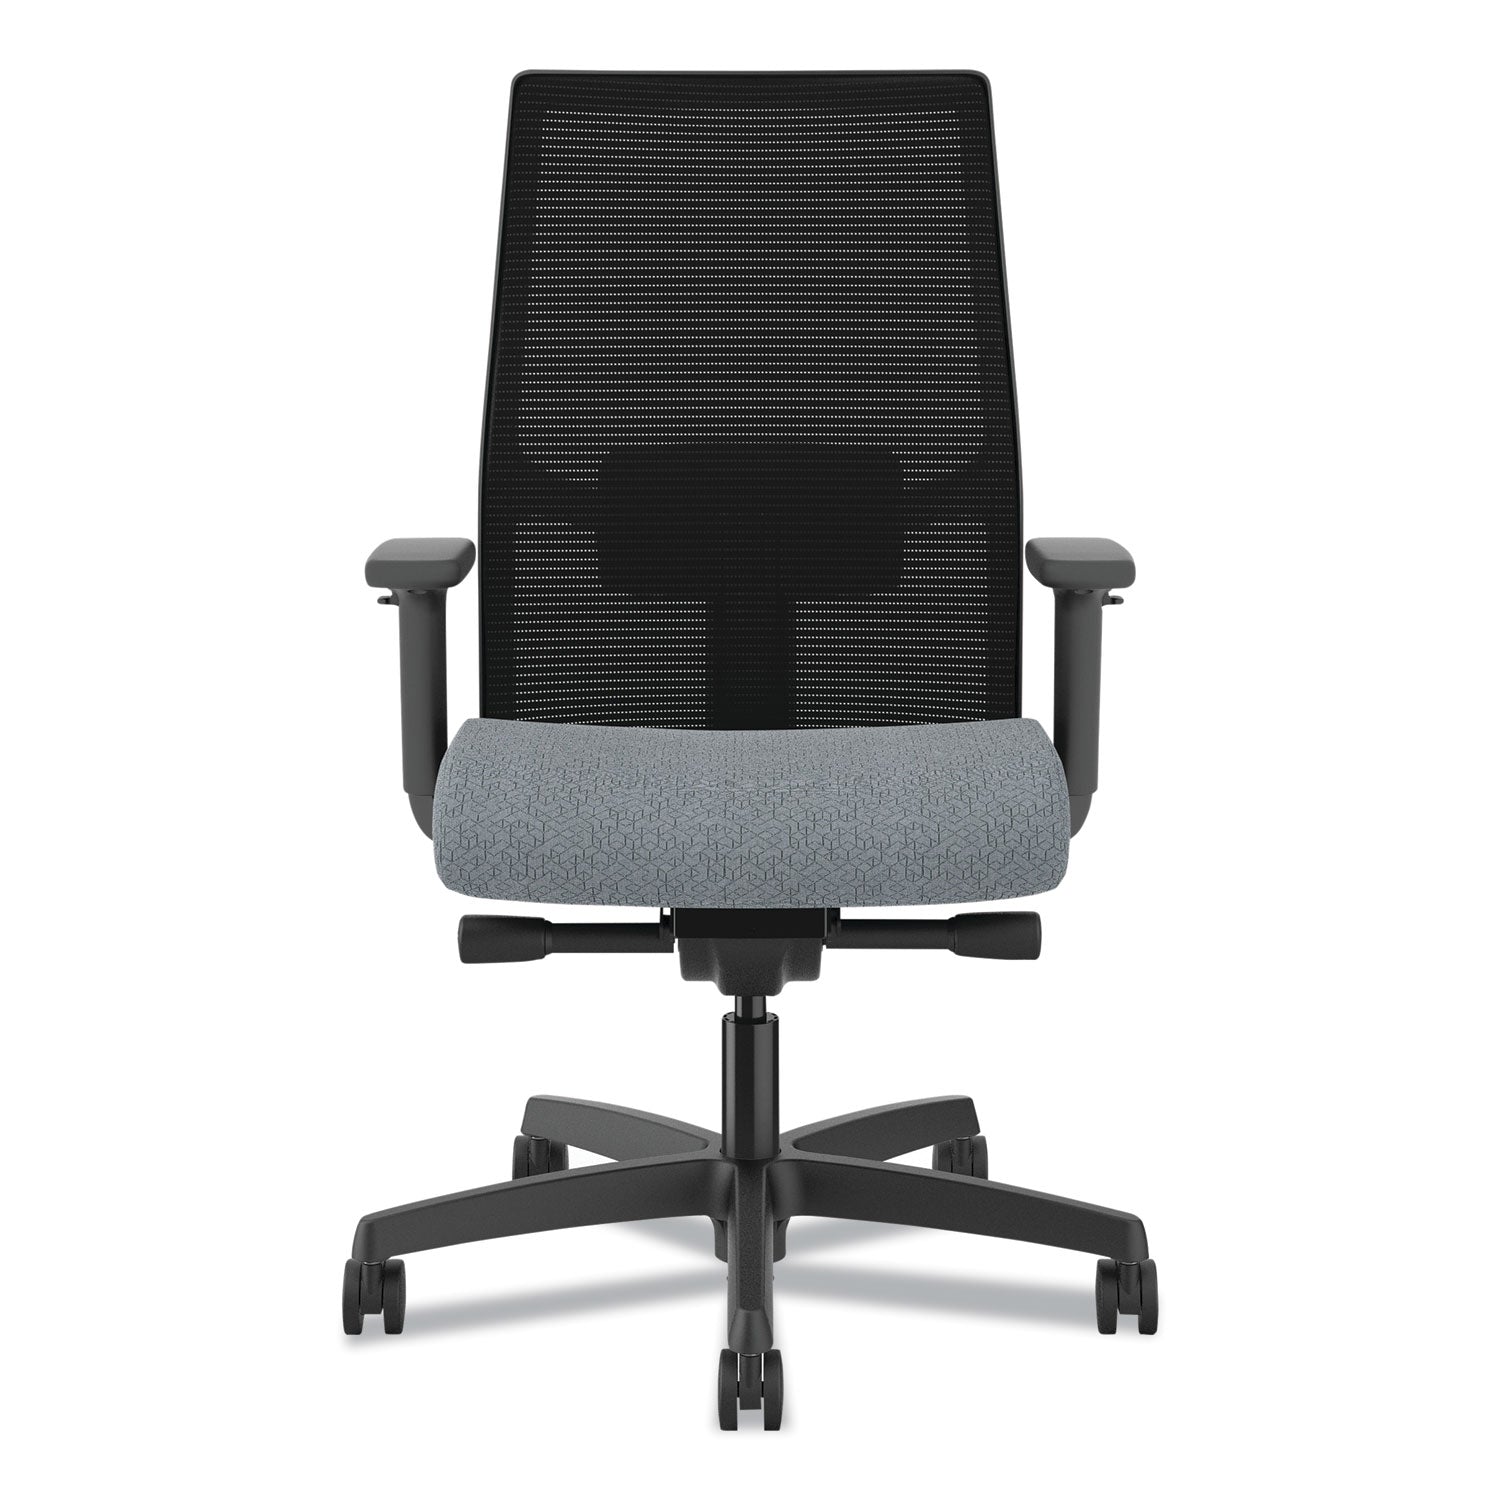 ignition-20-4-way-stretch-mid-back-mesh-task-chair-gray-adjustable-lumbar-support-basalt-black-ships-in-7-10-bus-days_honi2m2bmla25tk - 1